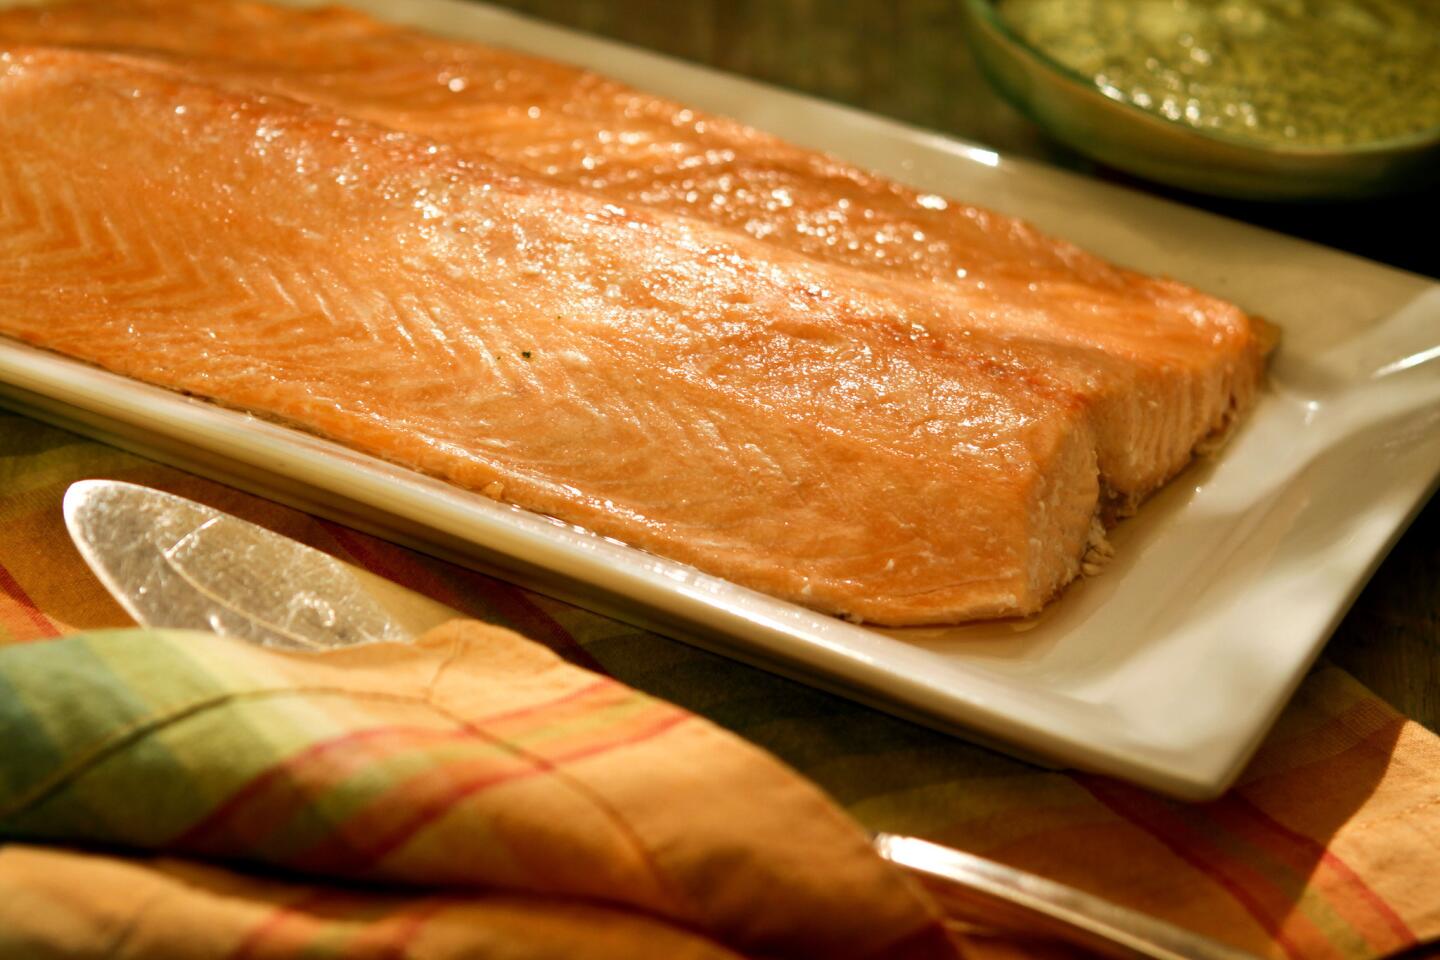 If you're looking for easy, it doesn't get much better than oven-steamed salmon.